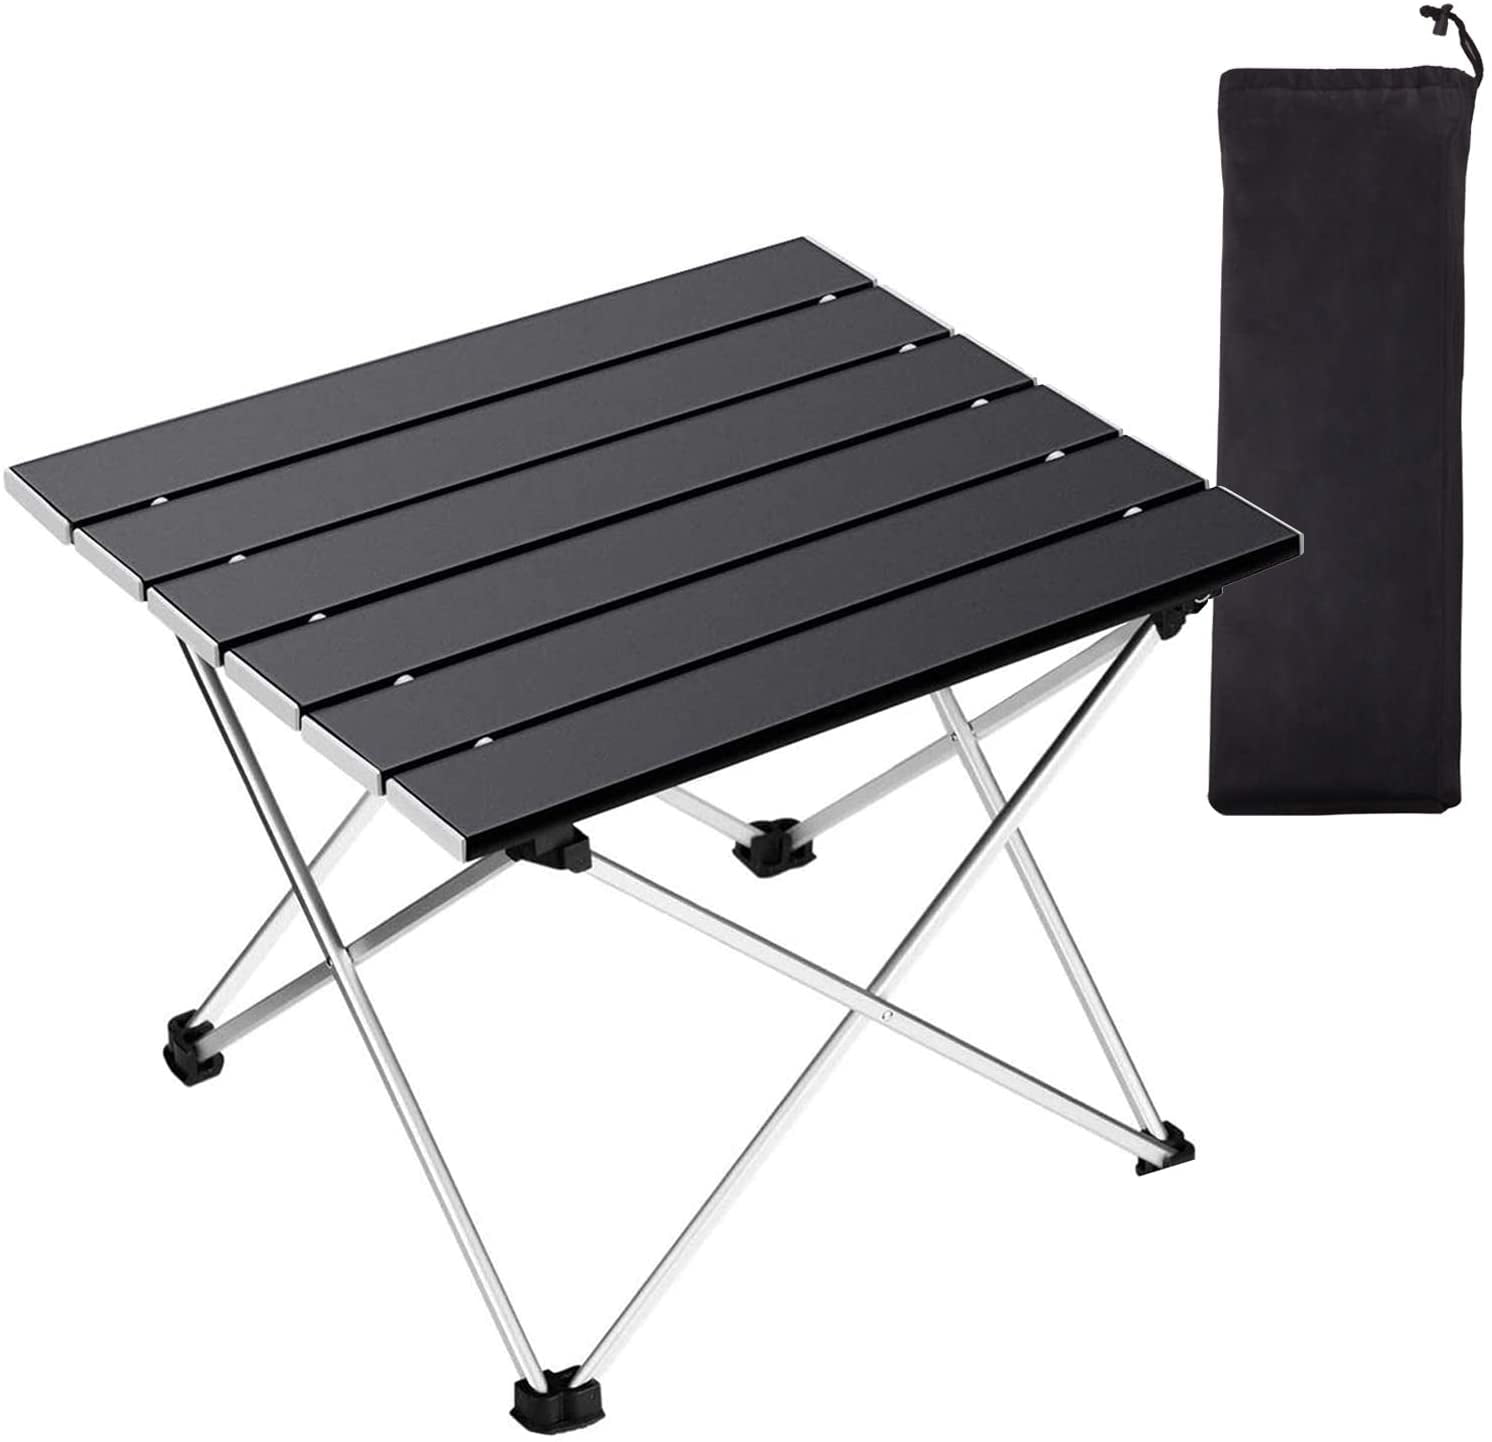 BBQ 3 Size Lightweight Picnic Table with Carry Bag for Hiking Portable Compact Roll Up Camp Table Fishing and Travel SOVIGOUR Aluminum Folding Camping Table 